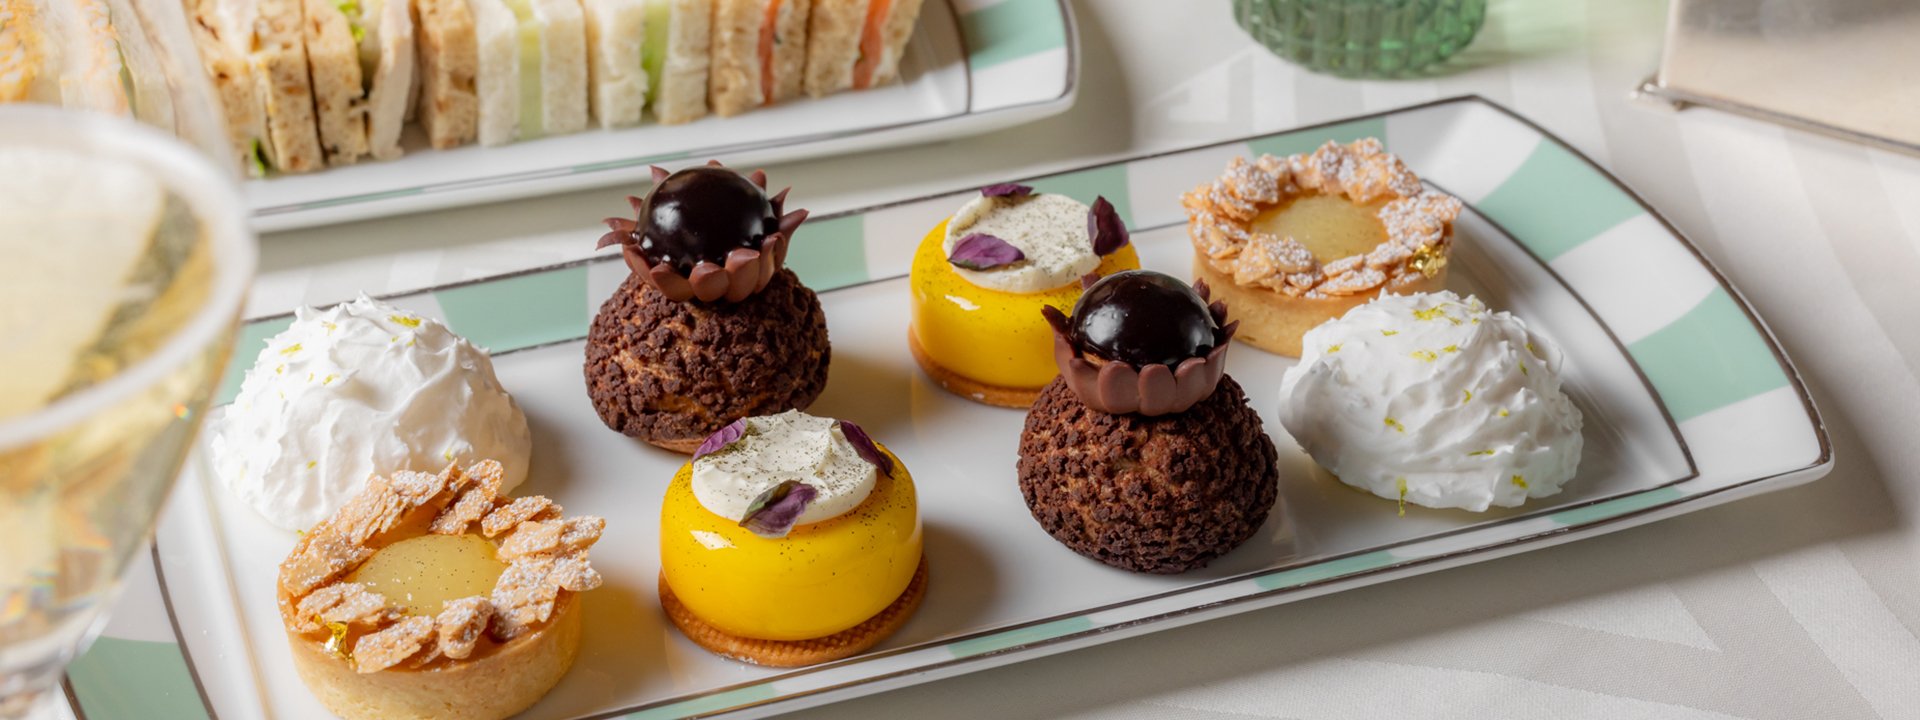 Mariage Frères launches their first Christmas teatime in Paris 